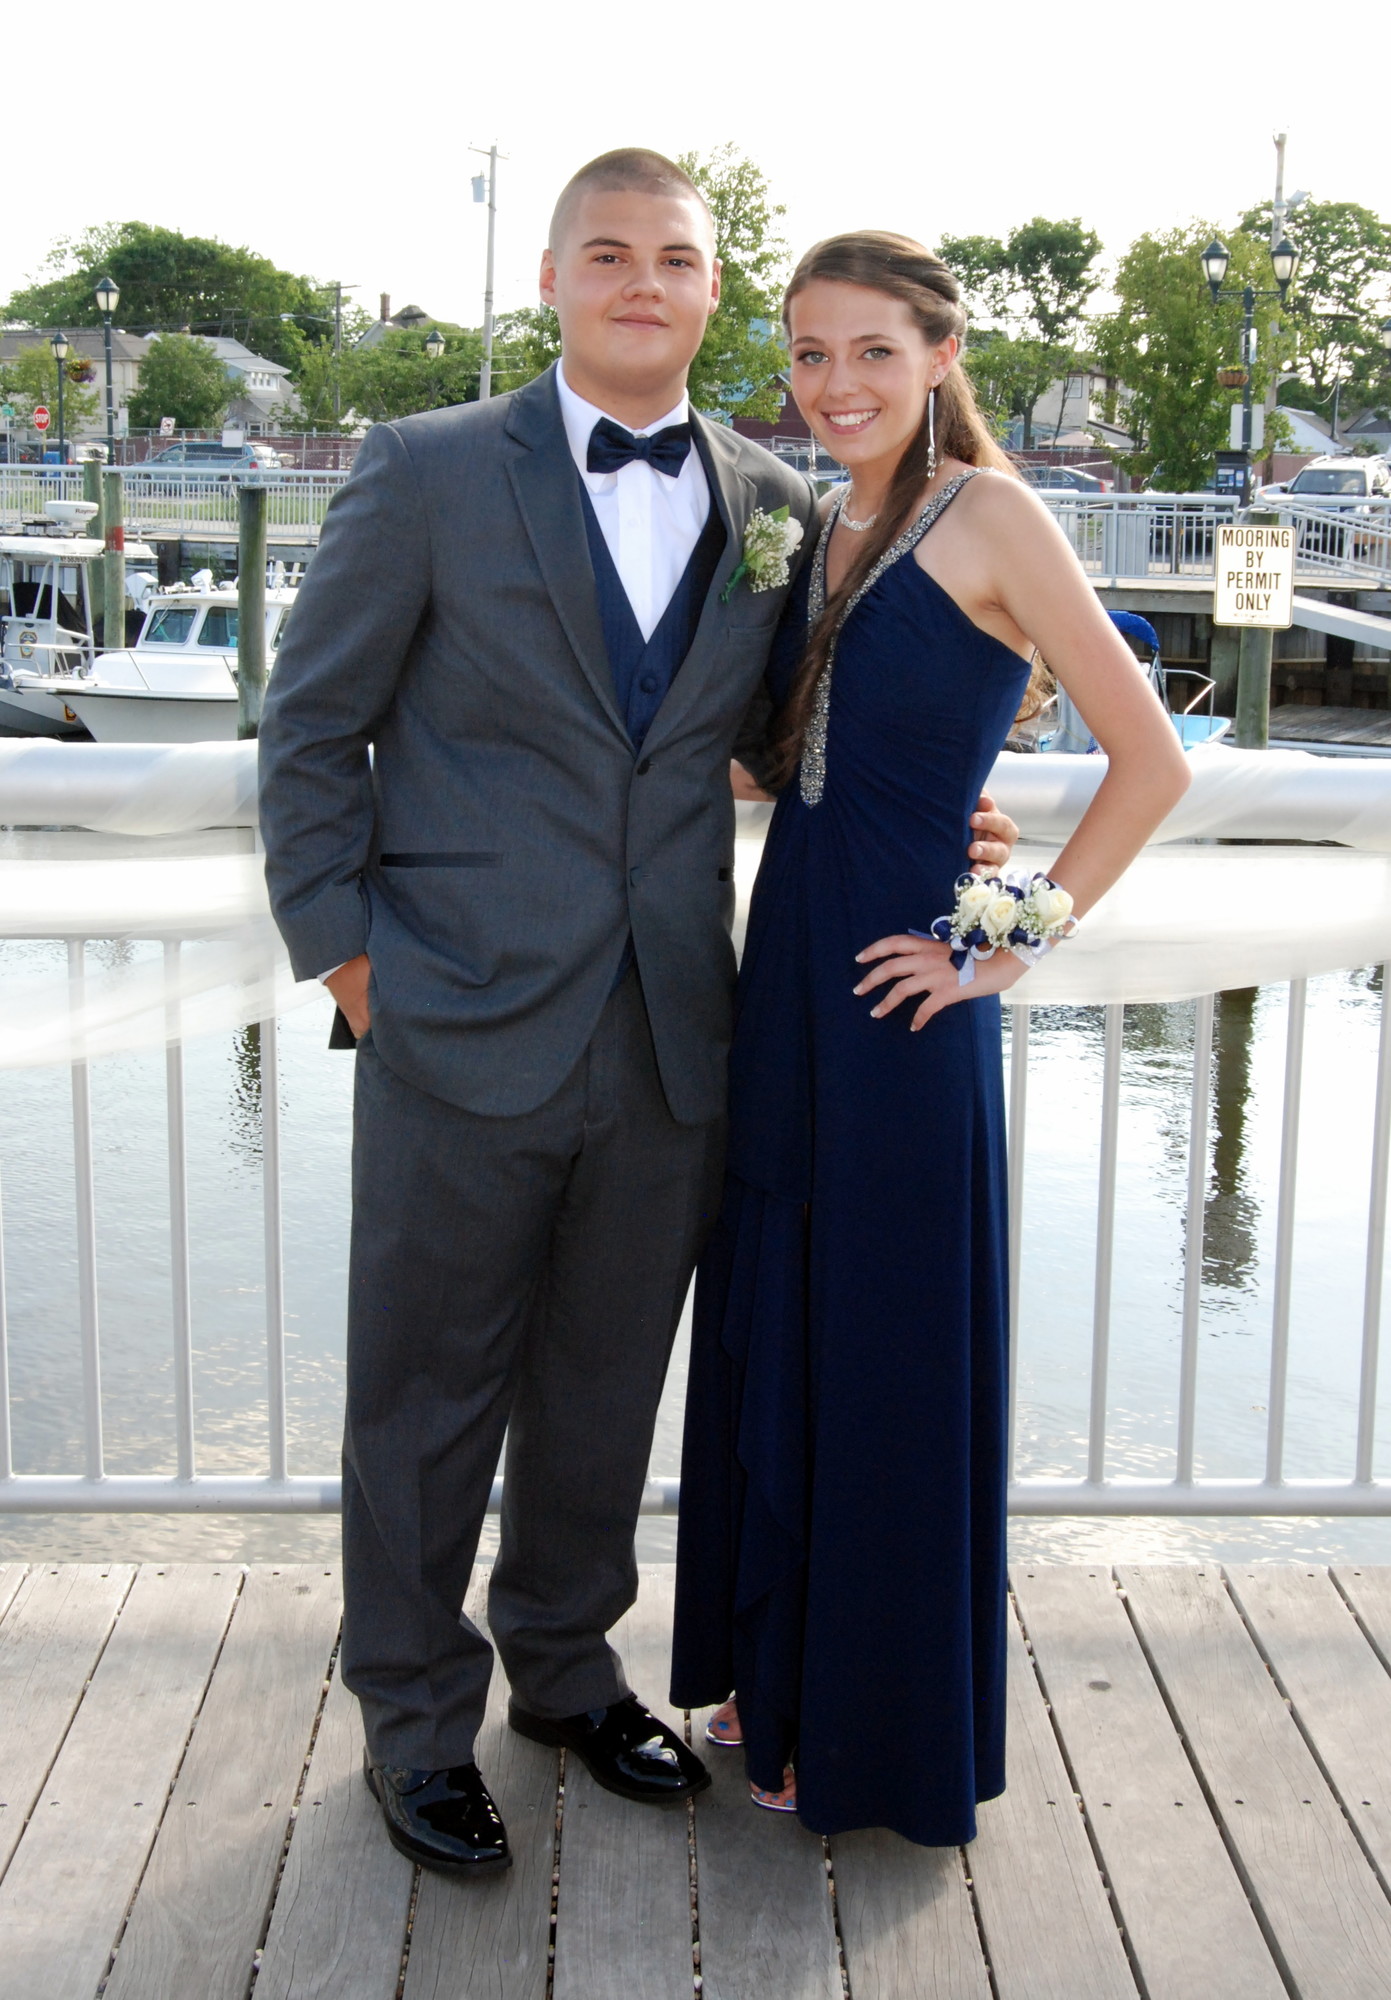 Matt Seifert and Jess Beeauchesne at the waterfront pre-prom party in East Rockaway.